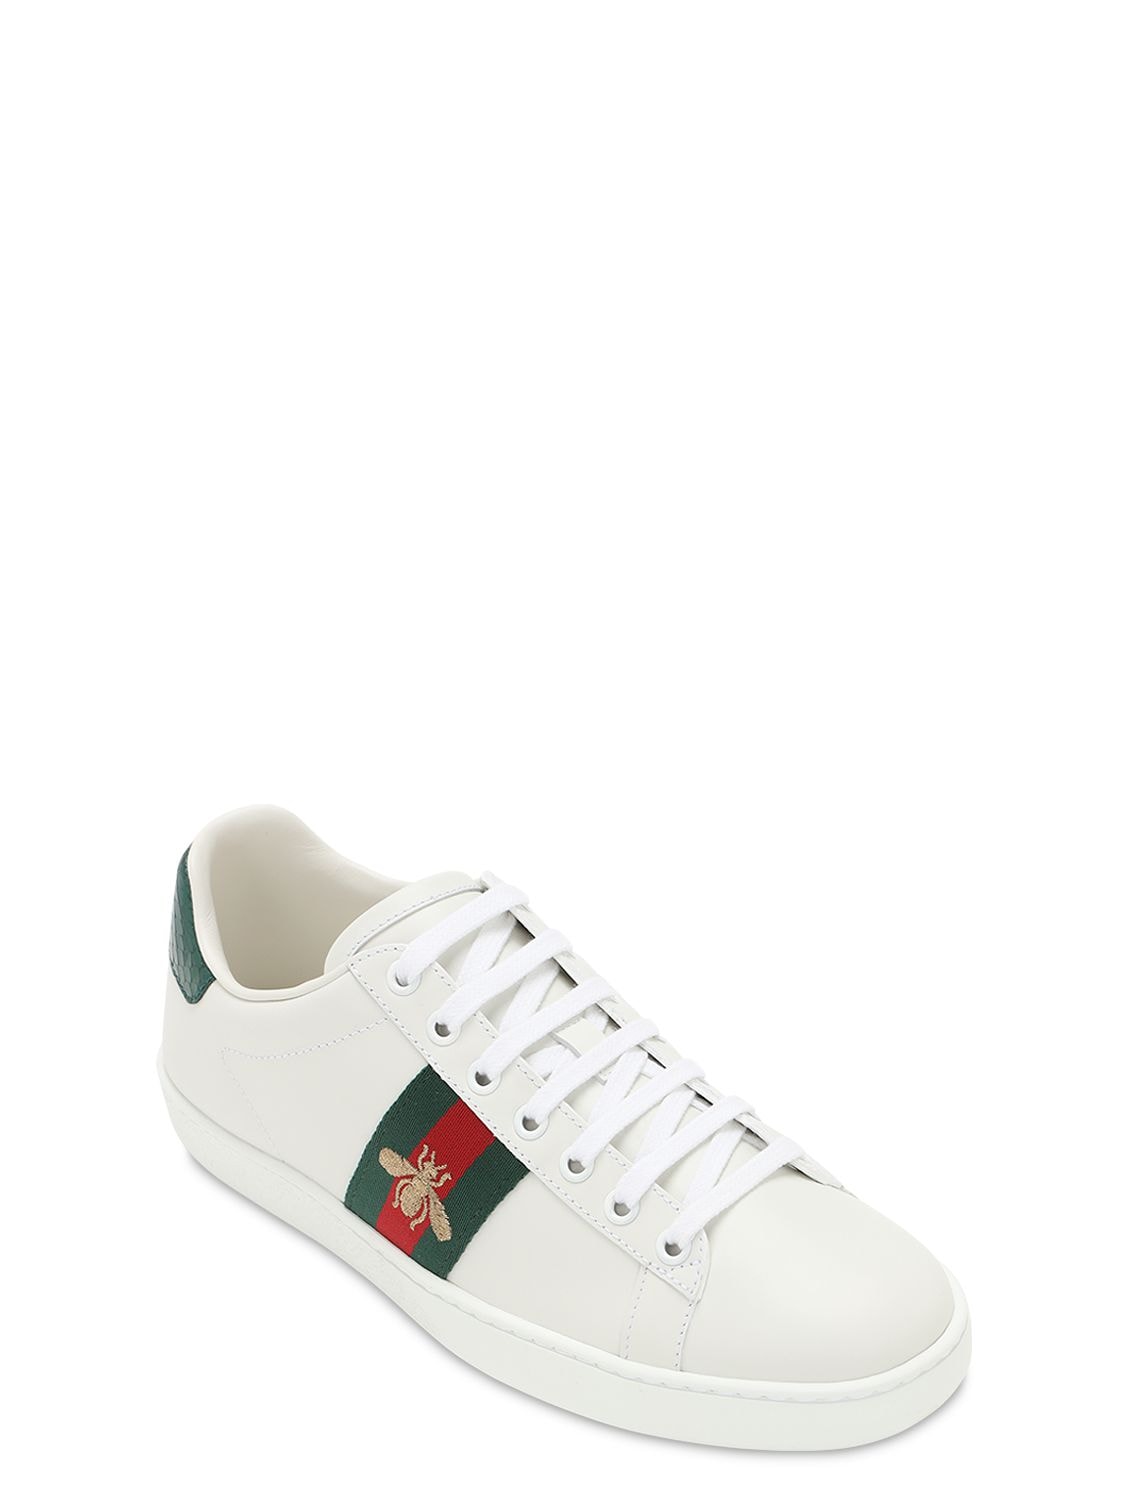 udluftning Opgive Paranafloden Gucci Ace Watersnake-trimmed Embroidered Leather Sneakers In White |  ModeSens